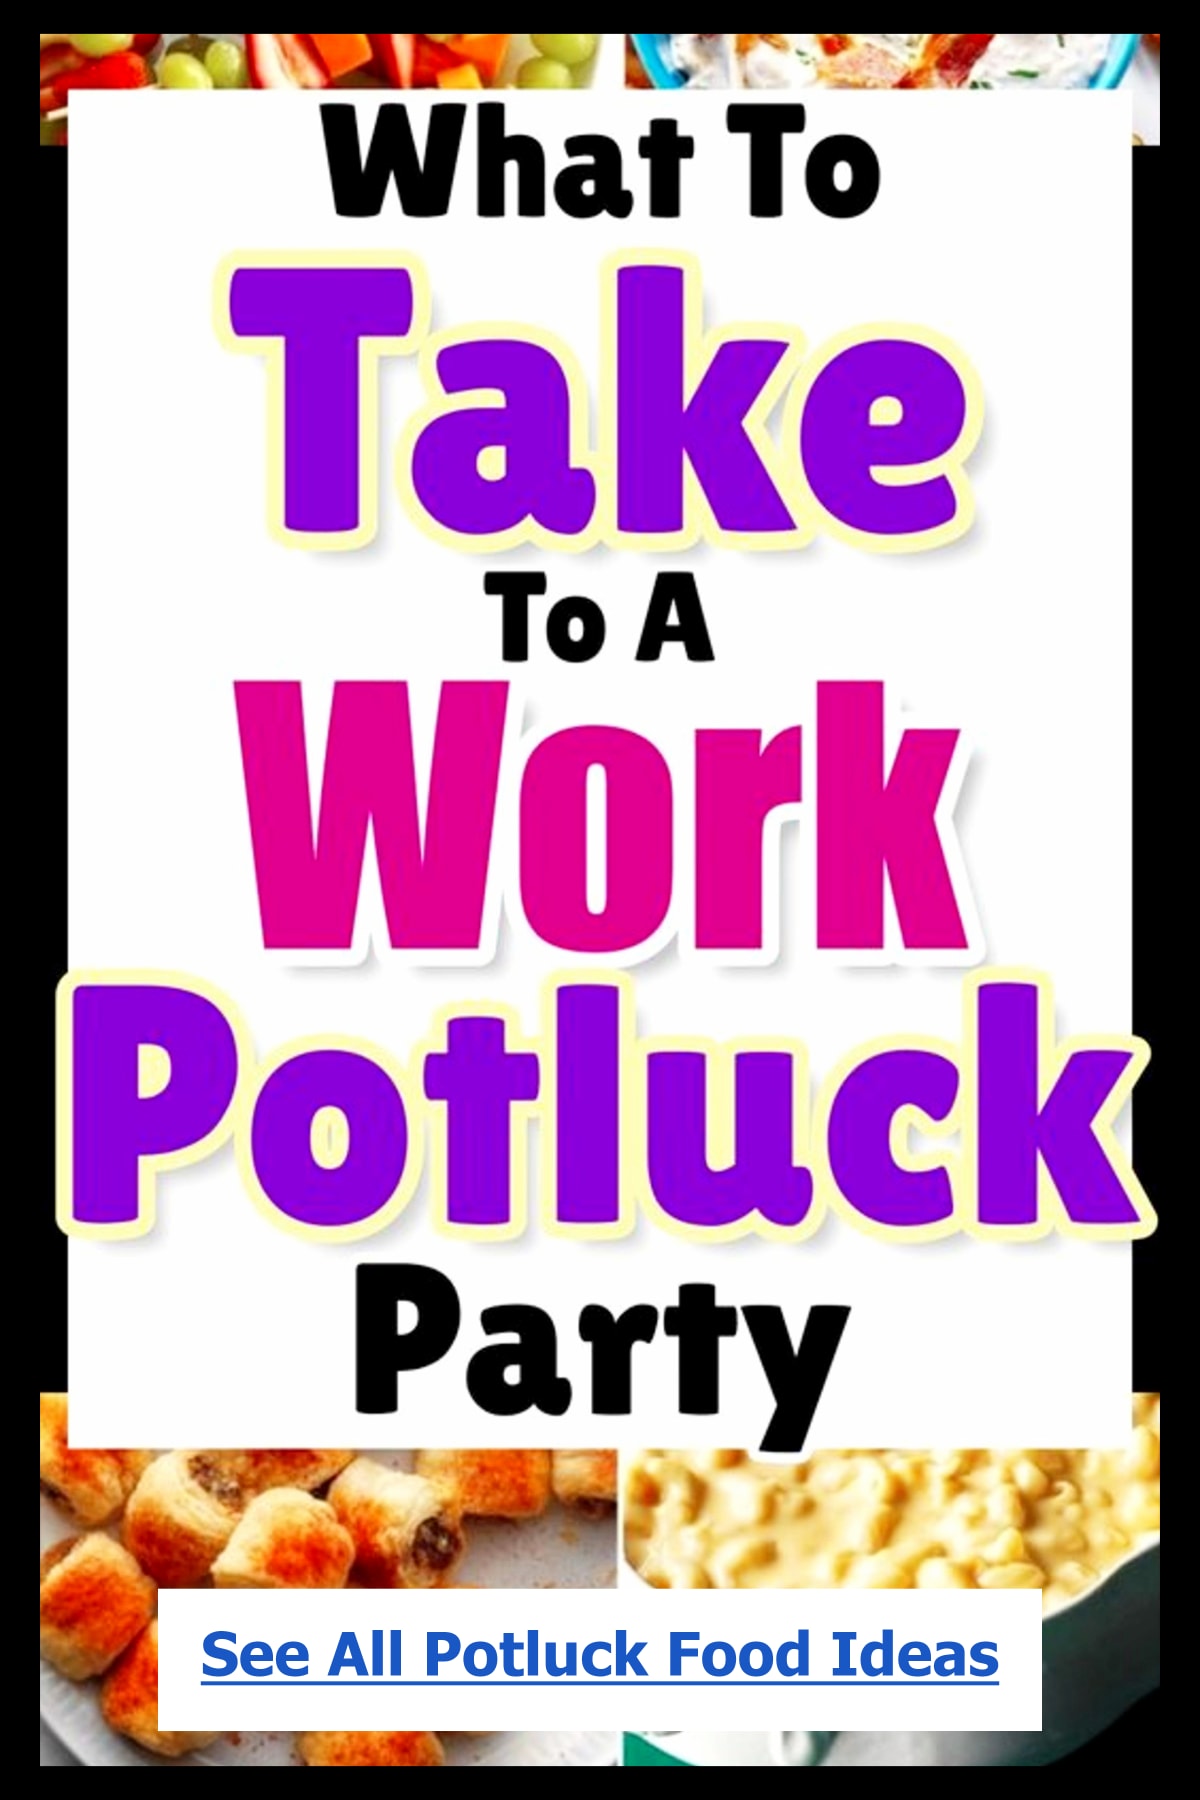 Potluck Finger Foods and Appetizers For Work